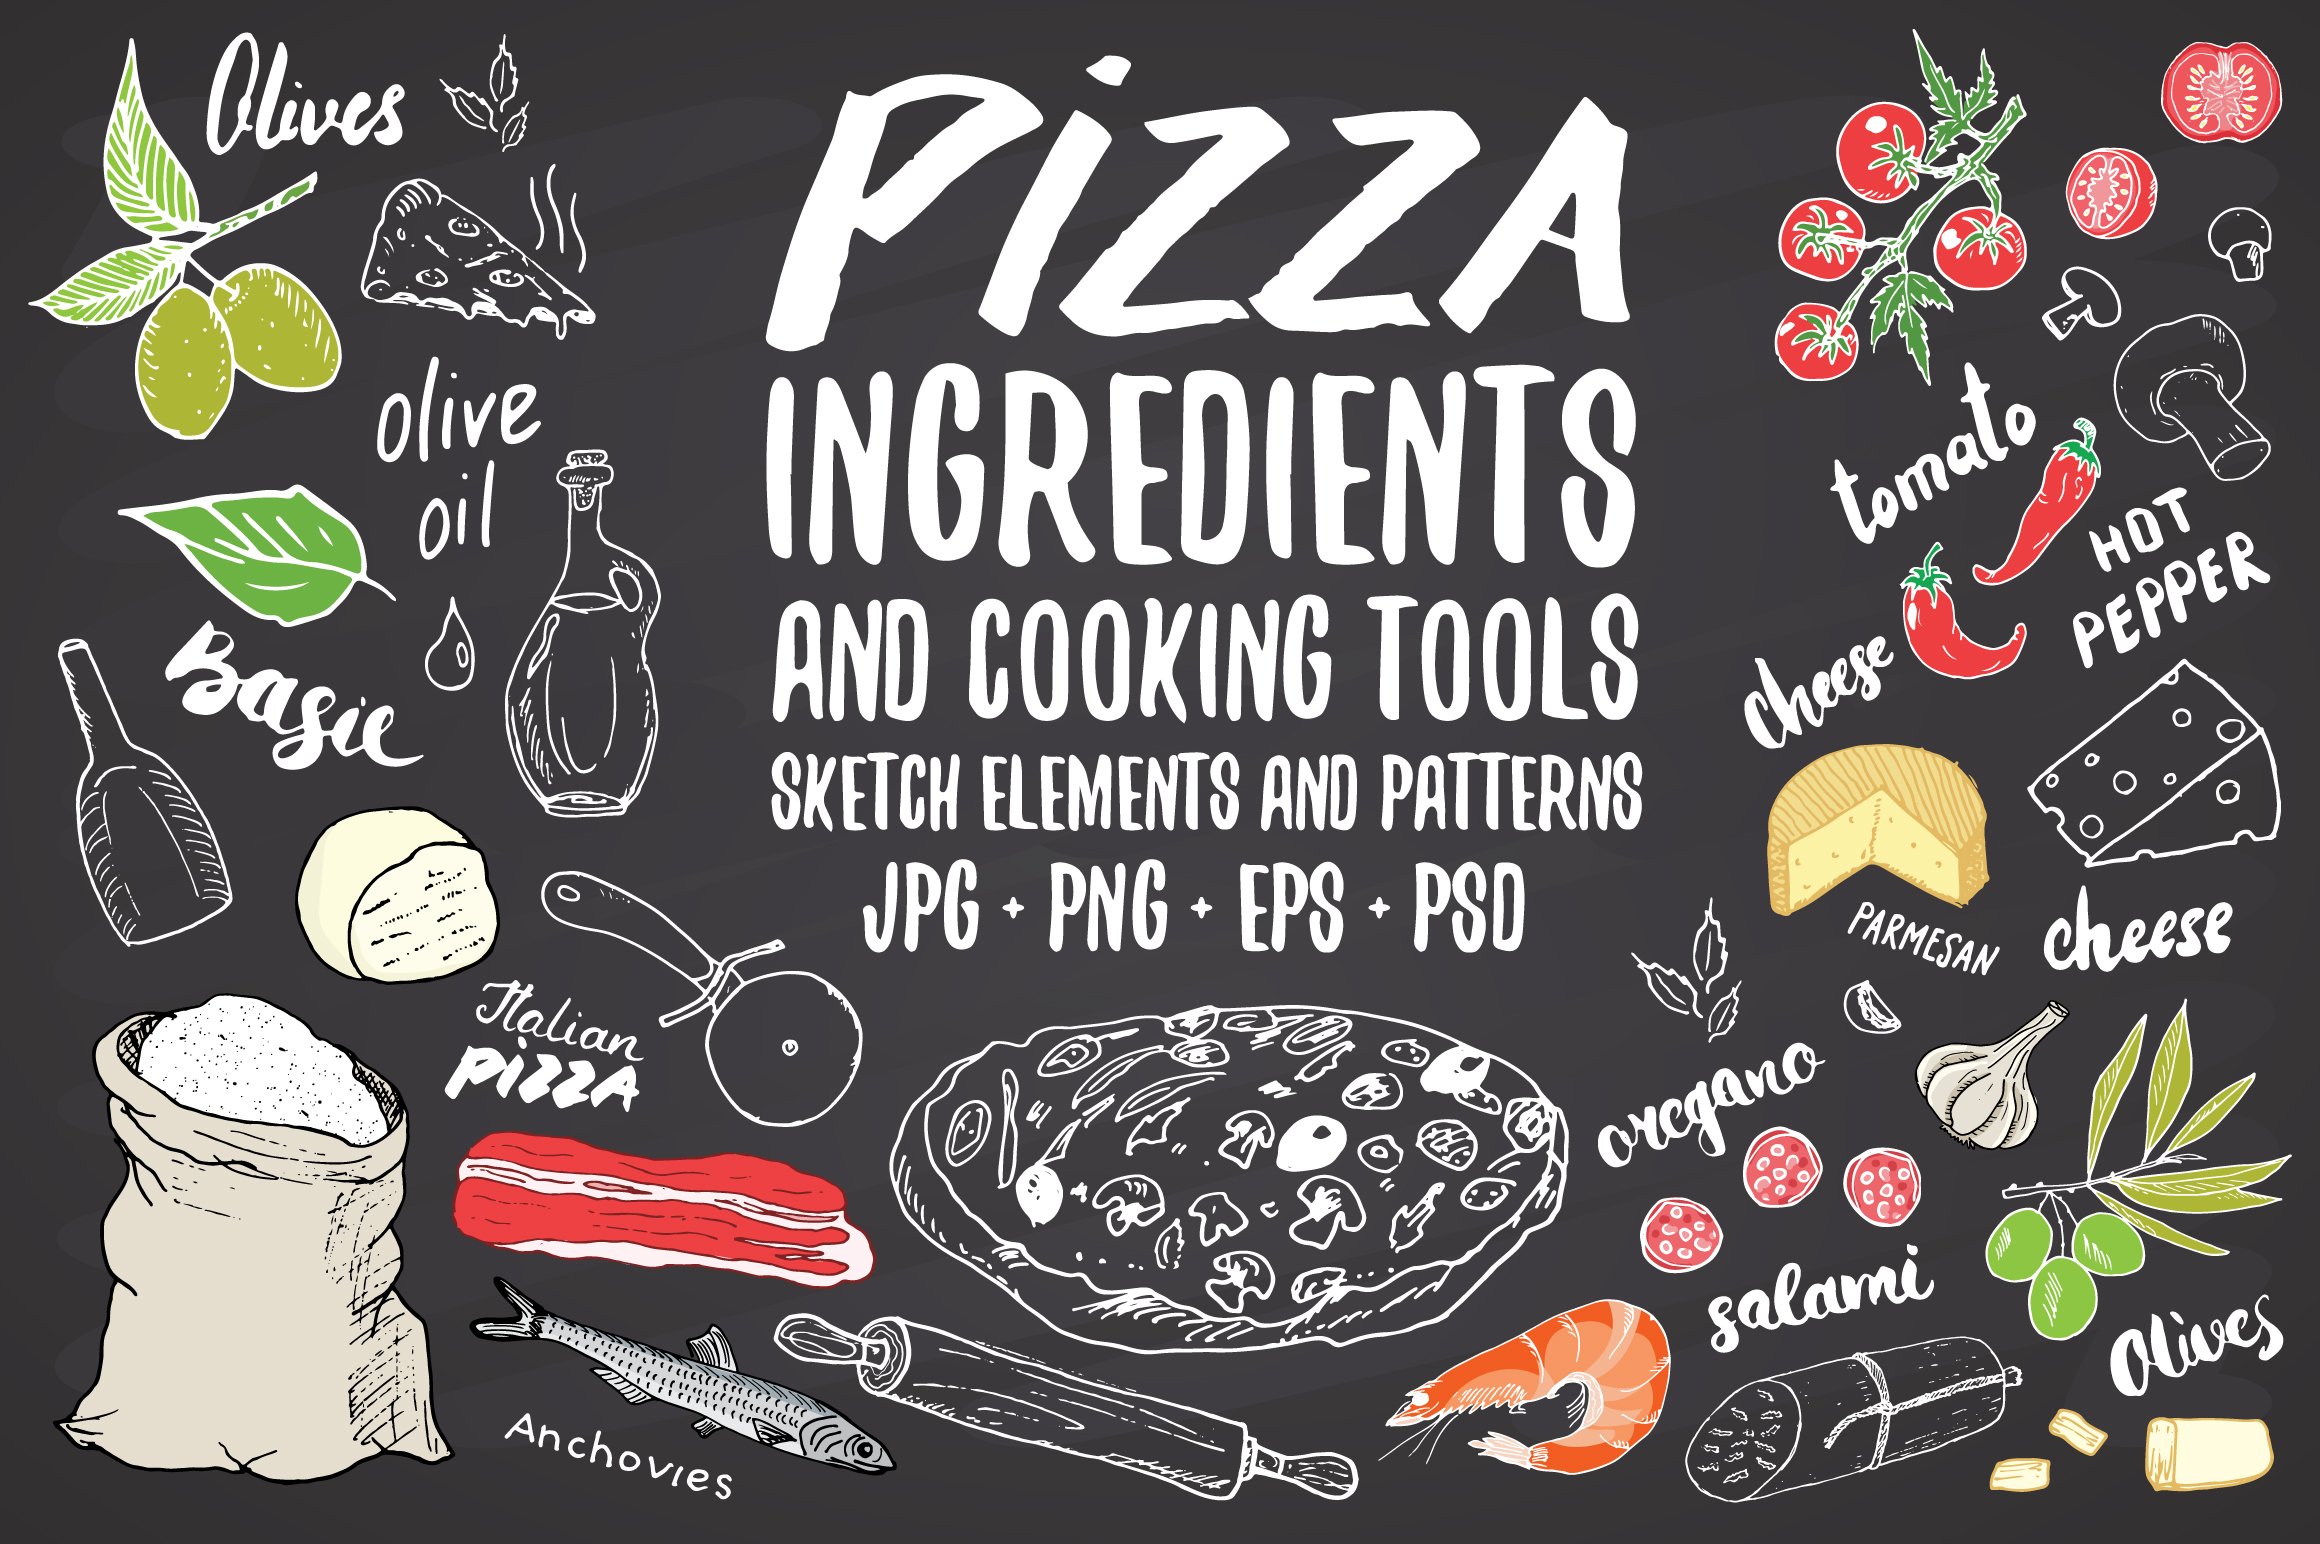 Pizza menu ingredients and patterns cover image.